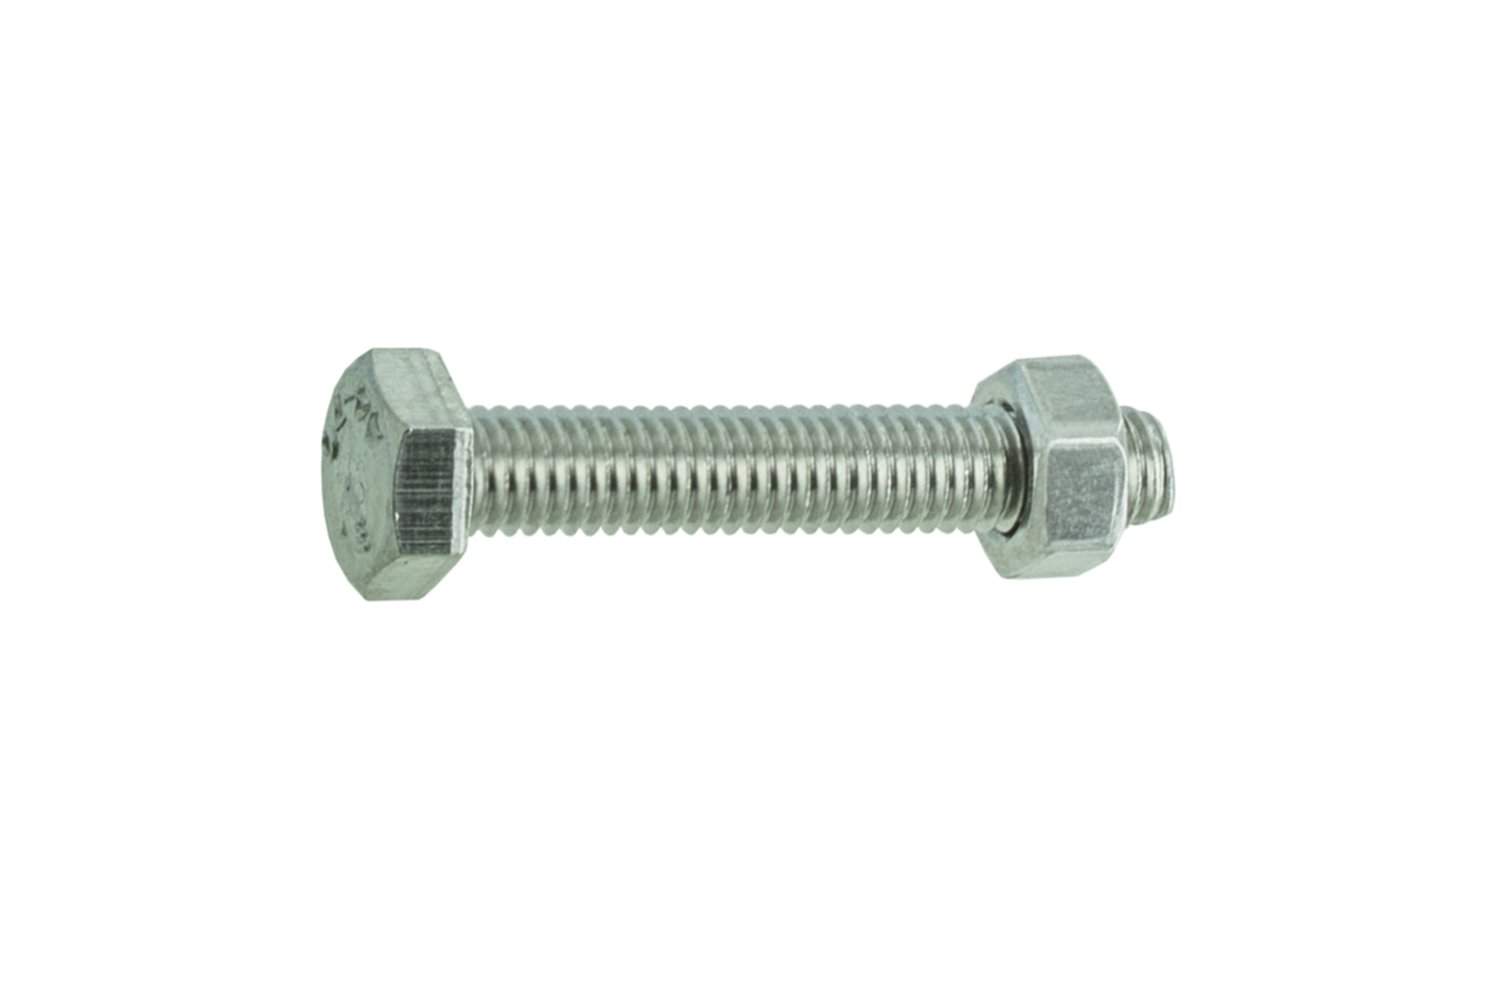 Hex head bolt stainless steel A4 8x30mm, 3 pieces.